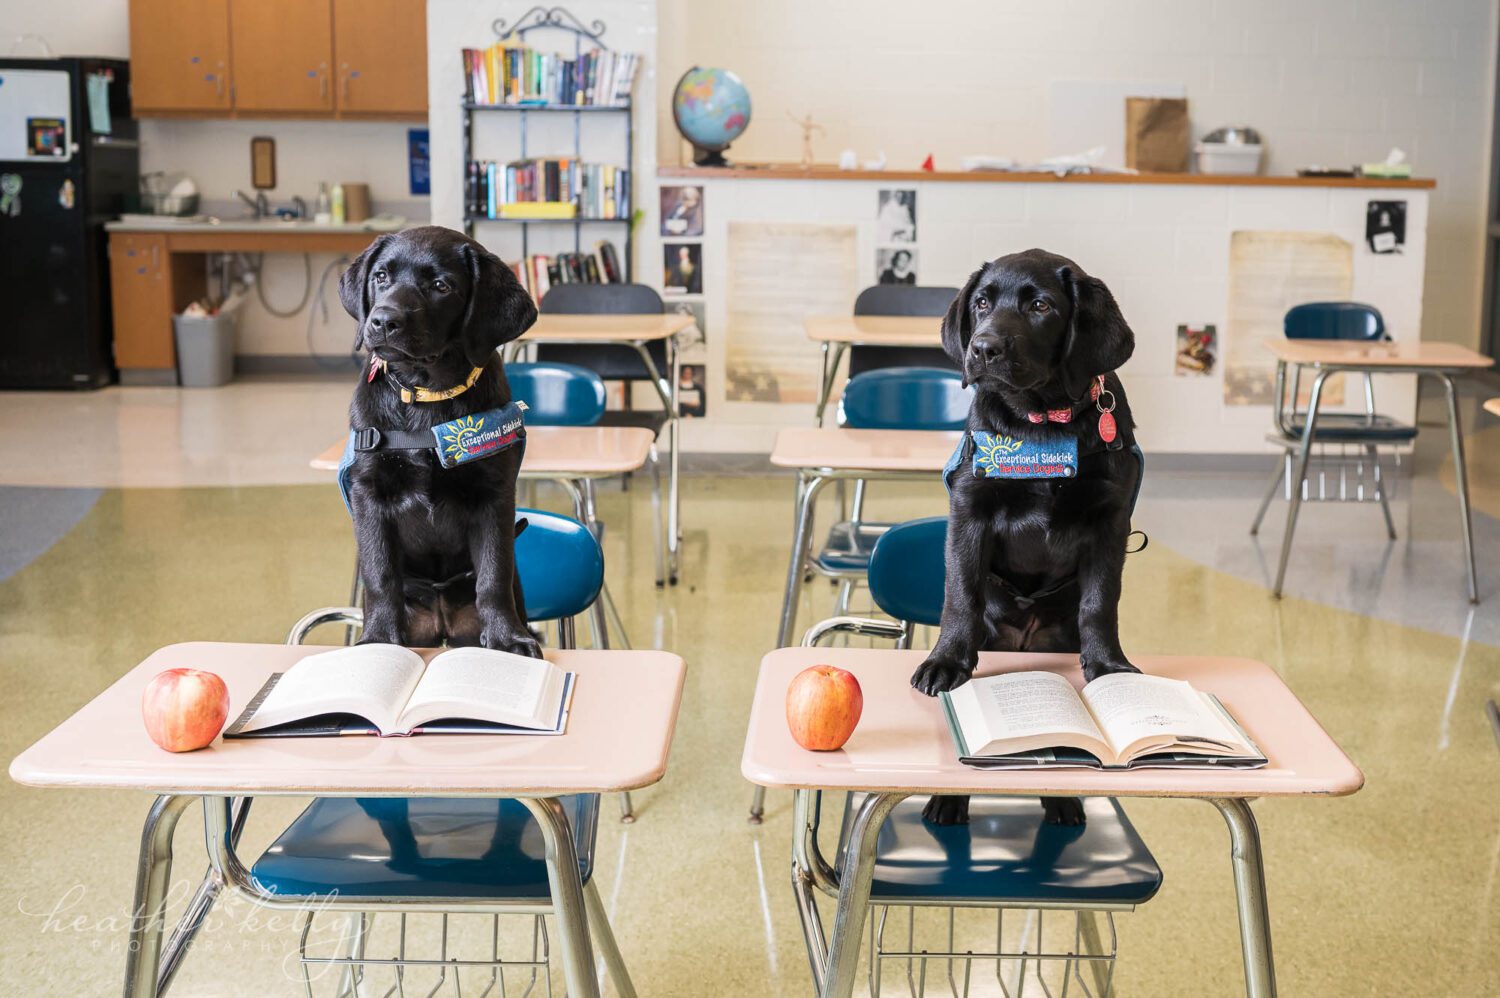 two service dogs in training sit at school desks in a classroom. There is an open text book and an apple on the desks. 